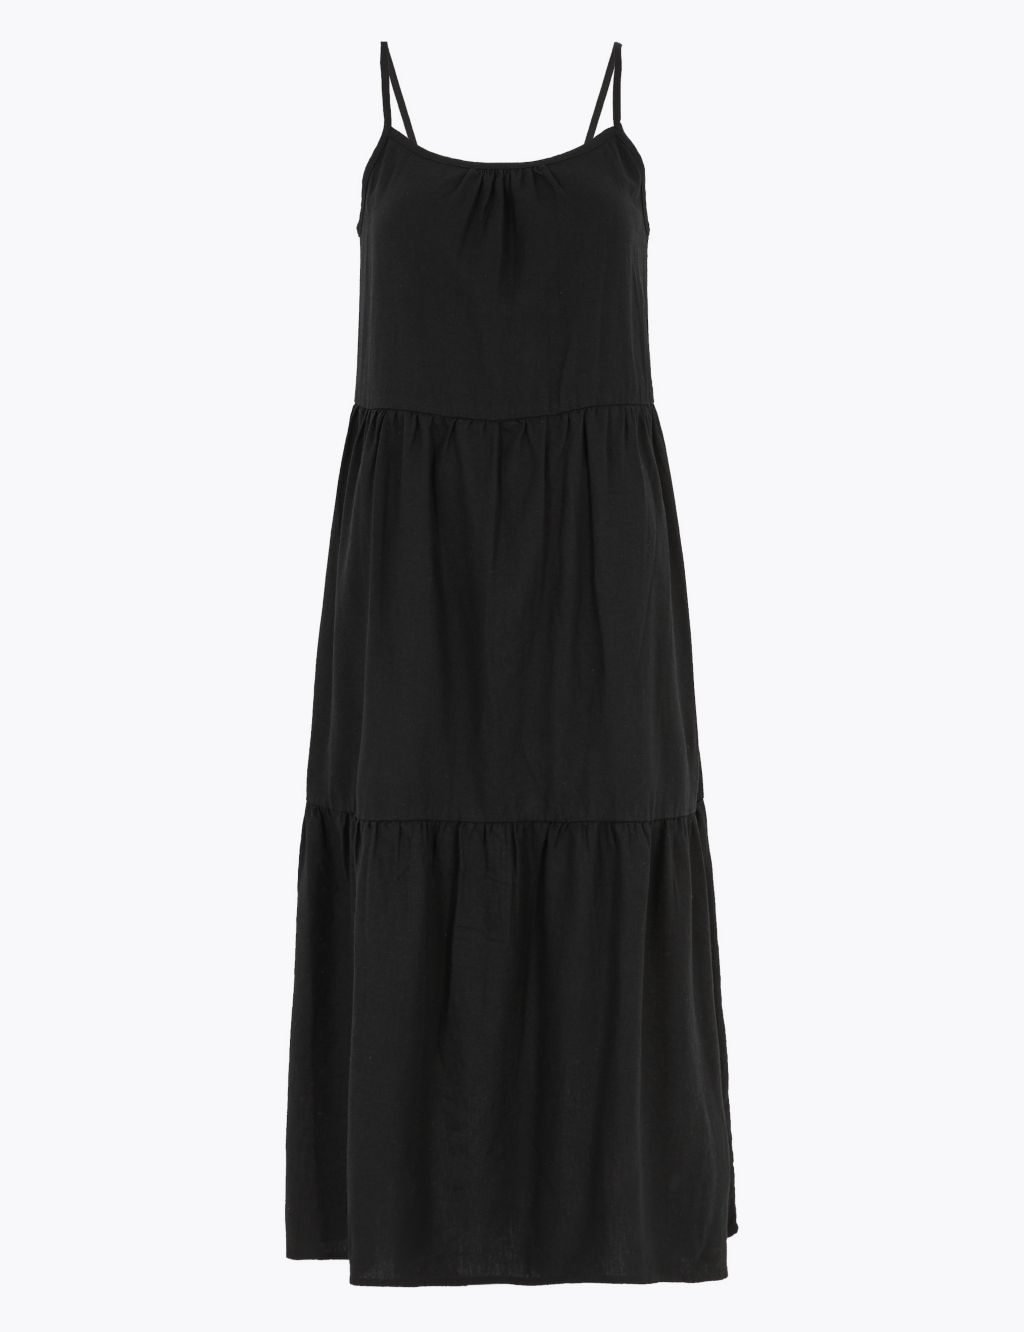 Linen Tiered Slip Dress | M&S Collection | M&S